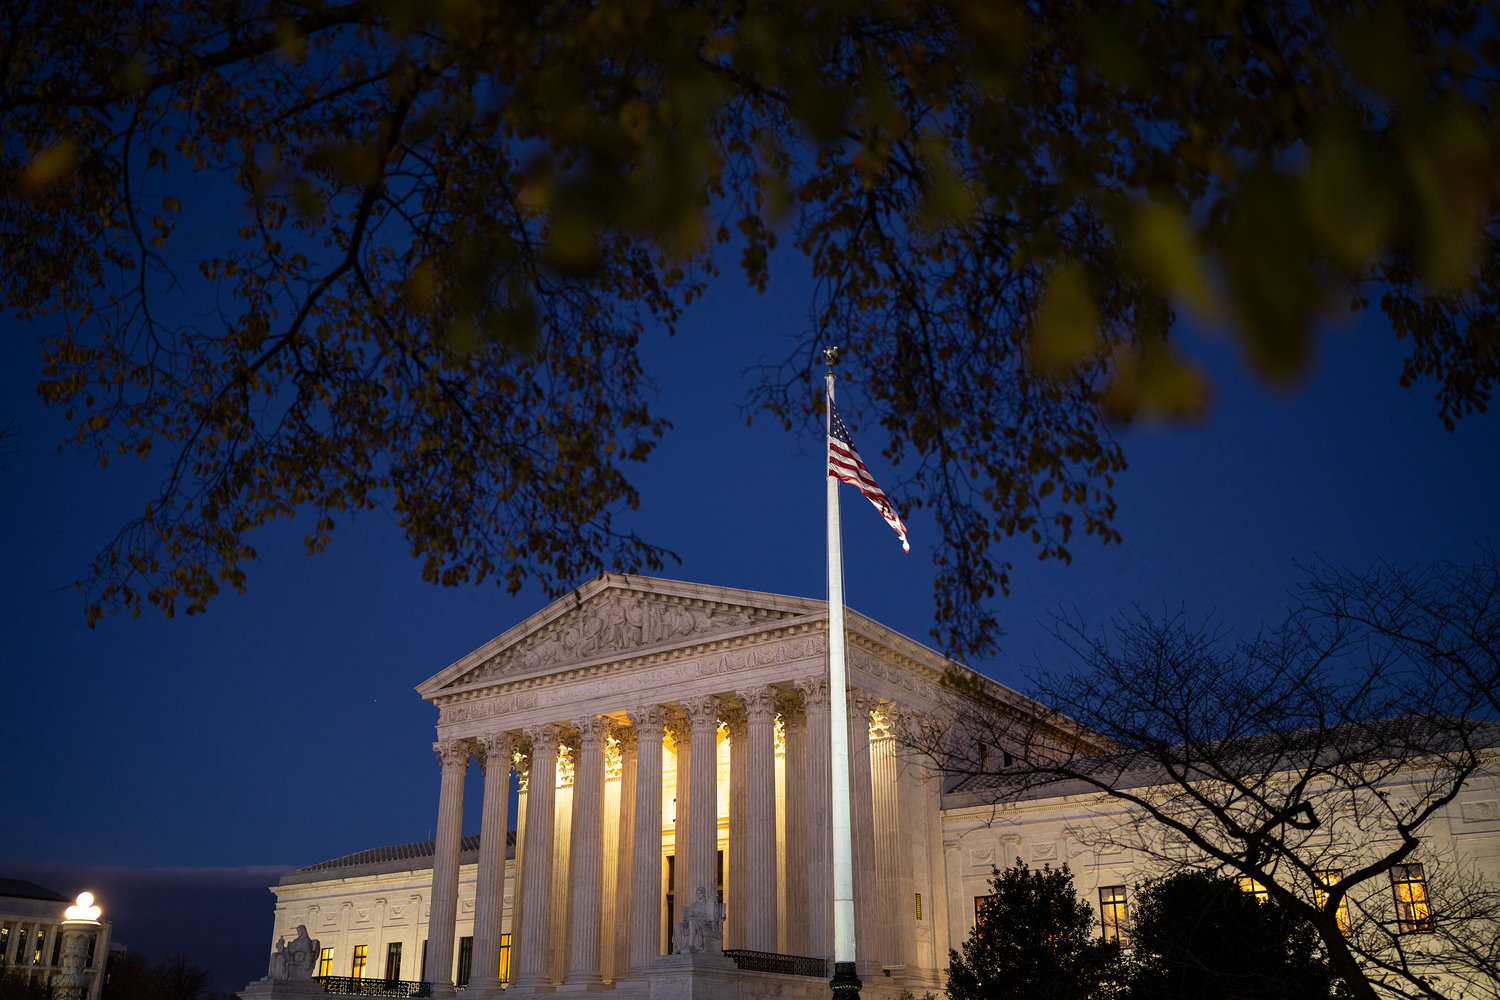 A view of the U.S. Supreme Court at dusk on Monday, Nov. 29, 2021 in Washington, D.C. On Wednesday, the Supreme Court will hear a case concerning a Mississippi law that would ban abortions after 15 weeks of pregnancy. (Drew Angerer/Getty Images/TNS)